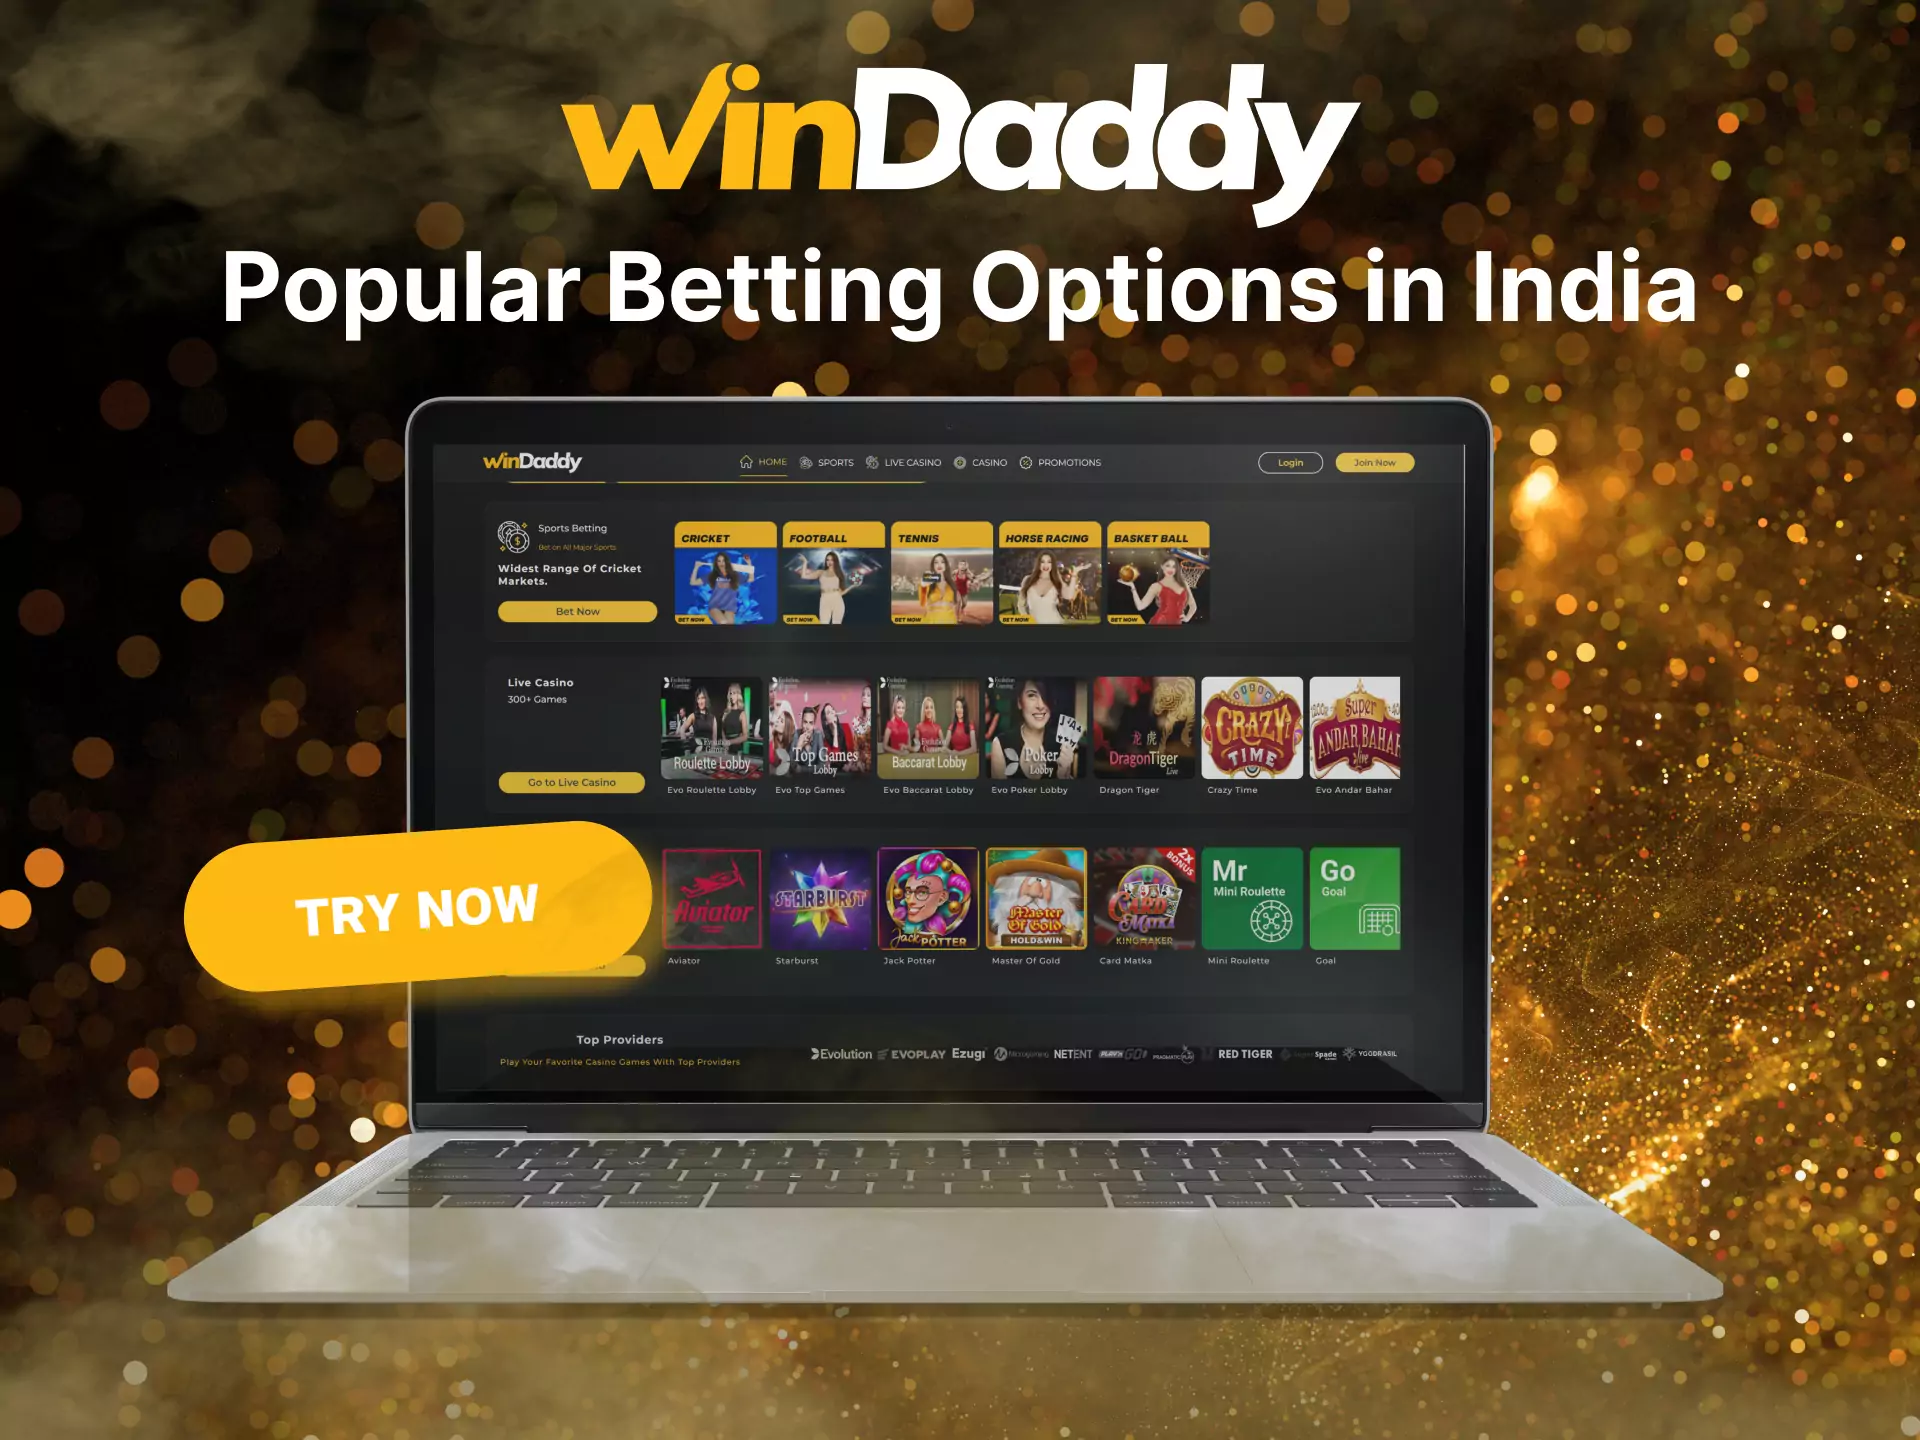 Try all the popular types of bets at Windaddy in India.